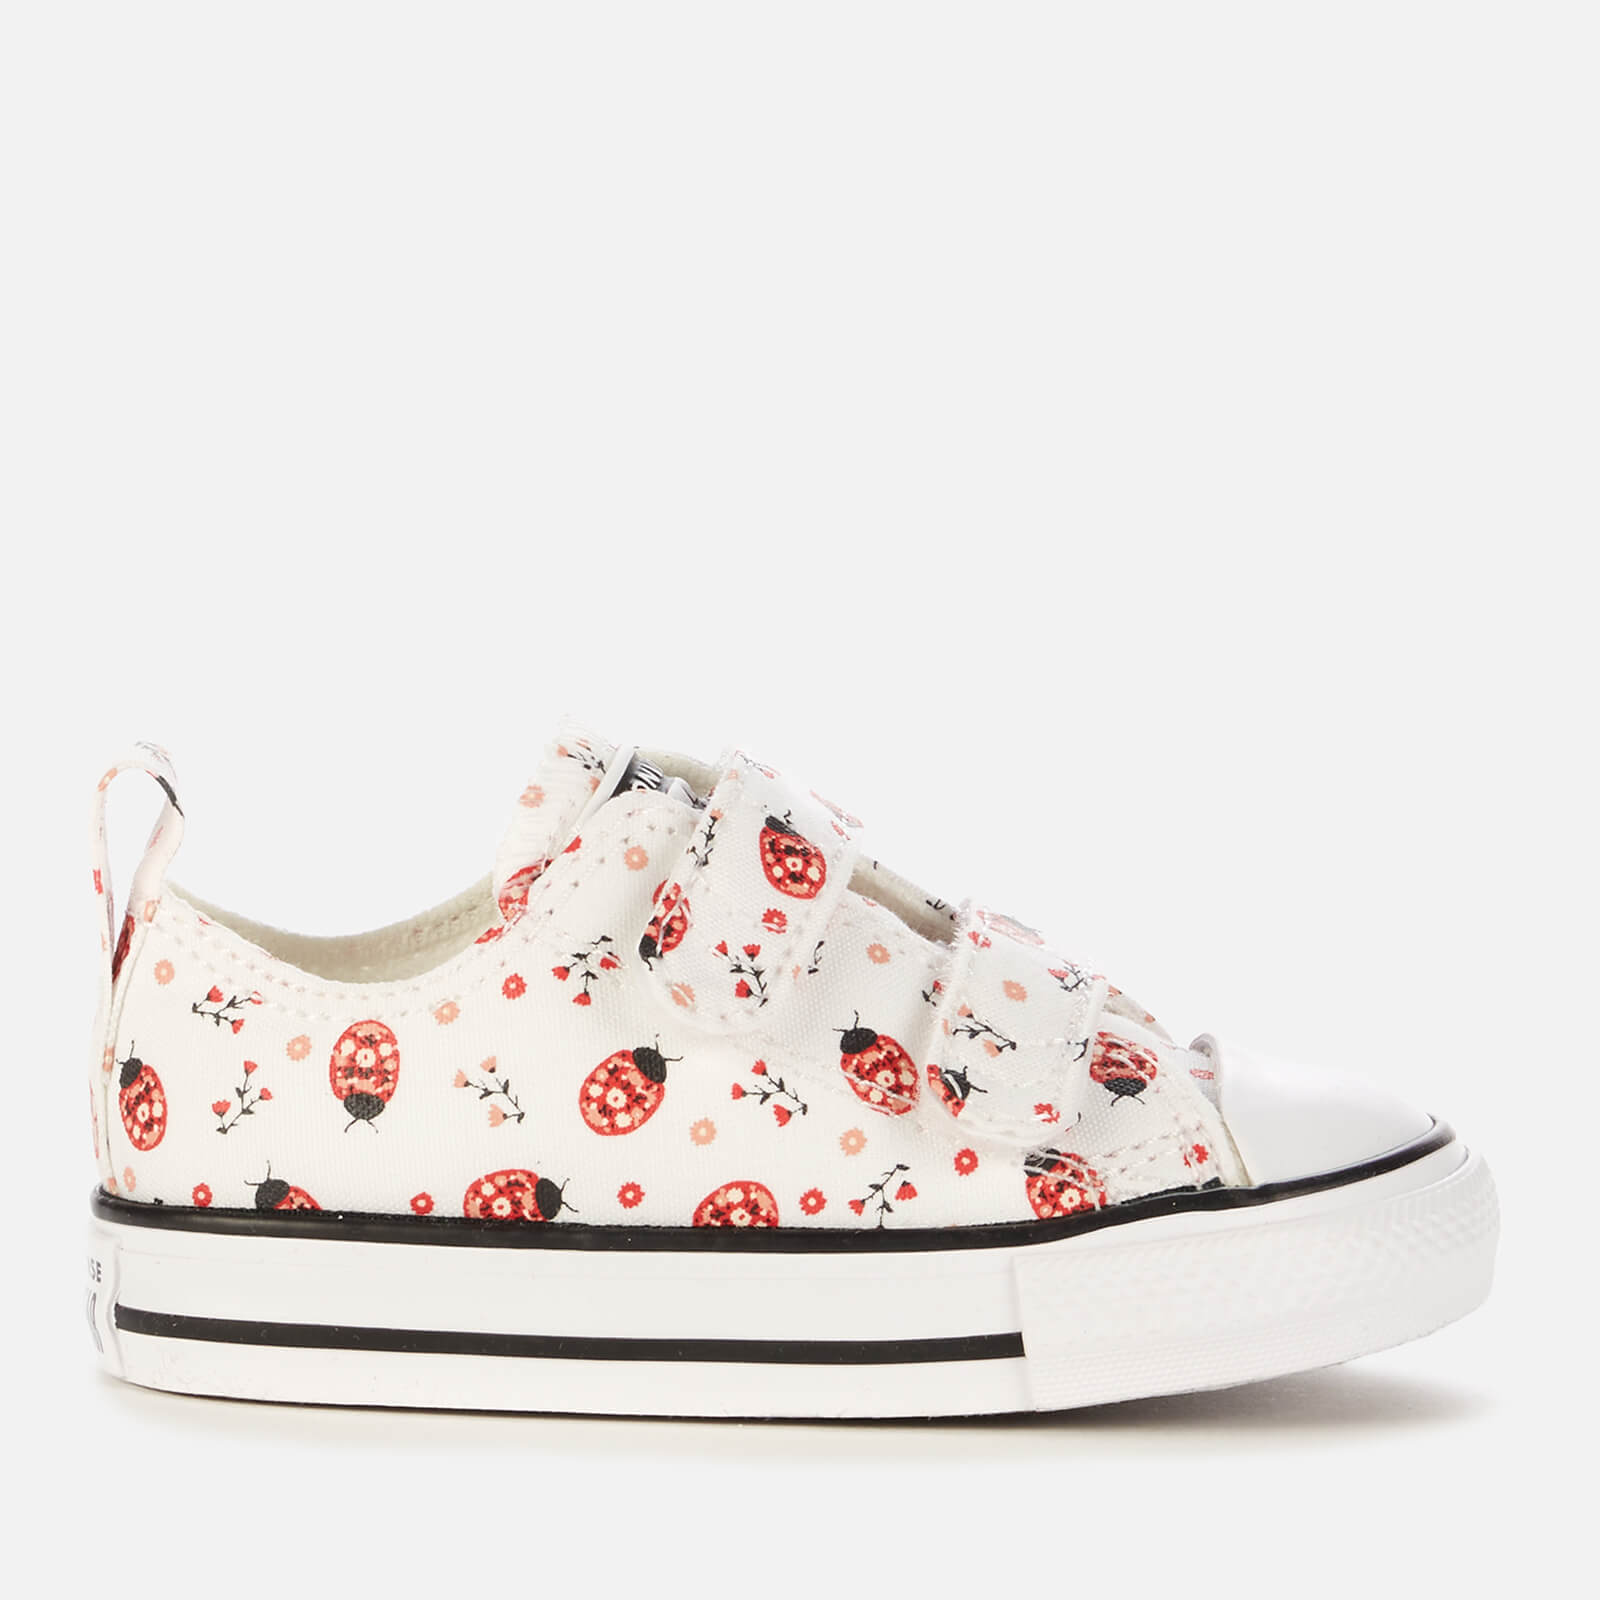 Converse Toddlers' Chuck Taylor All Star Ladybird Velcro Ox Trainers - White/Red/Black - UK 4 Toddler